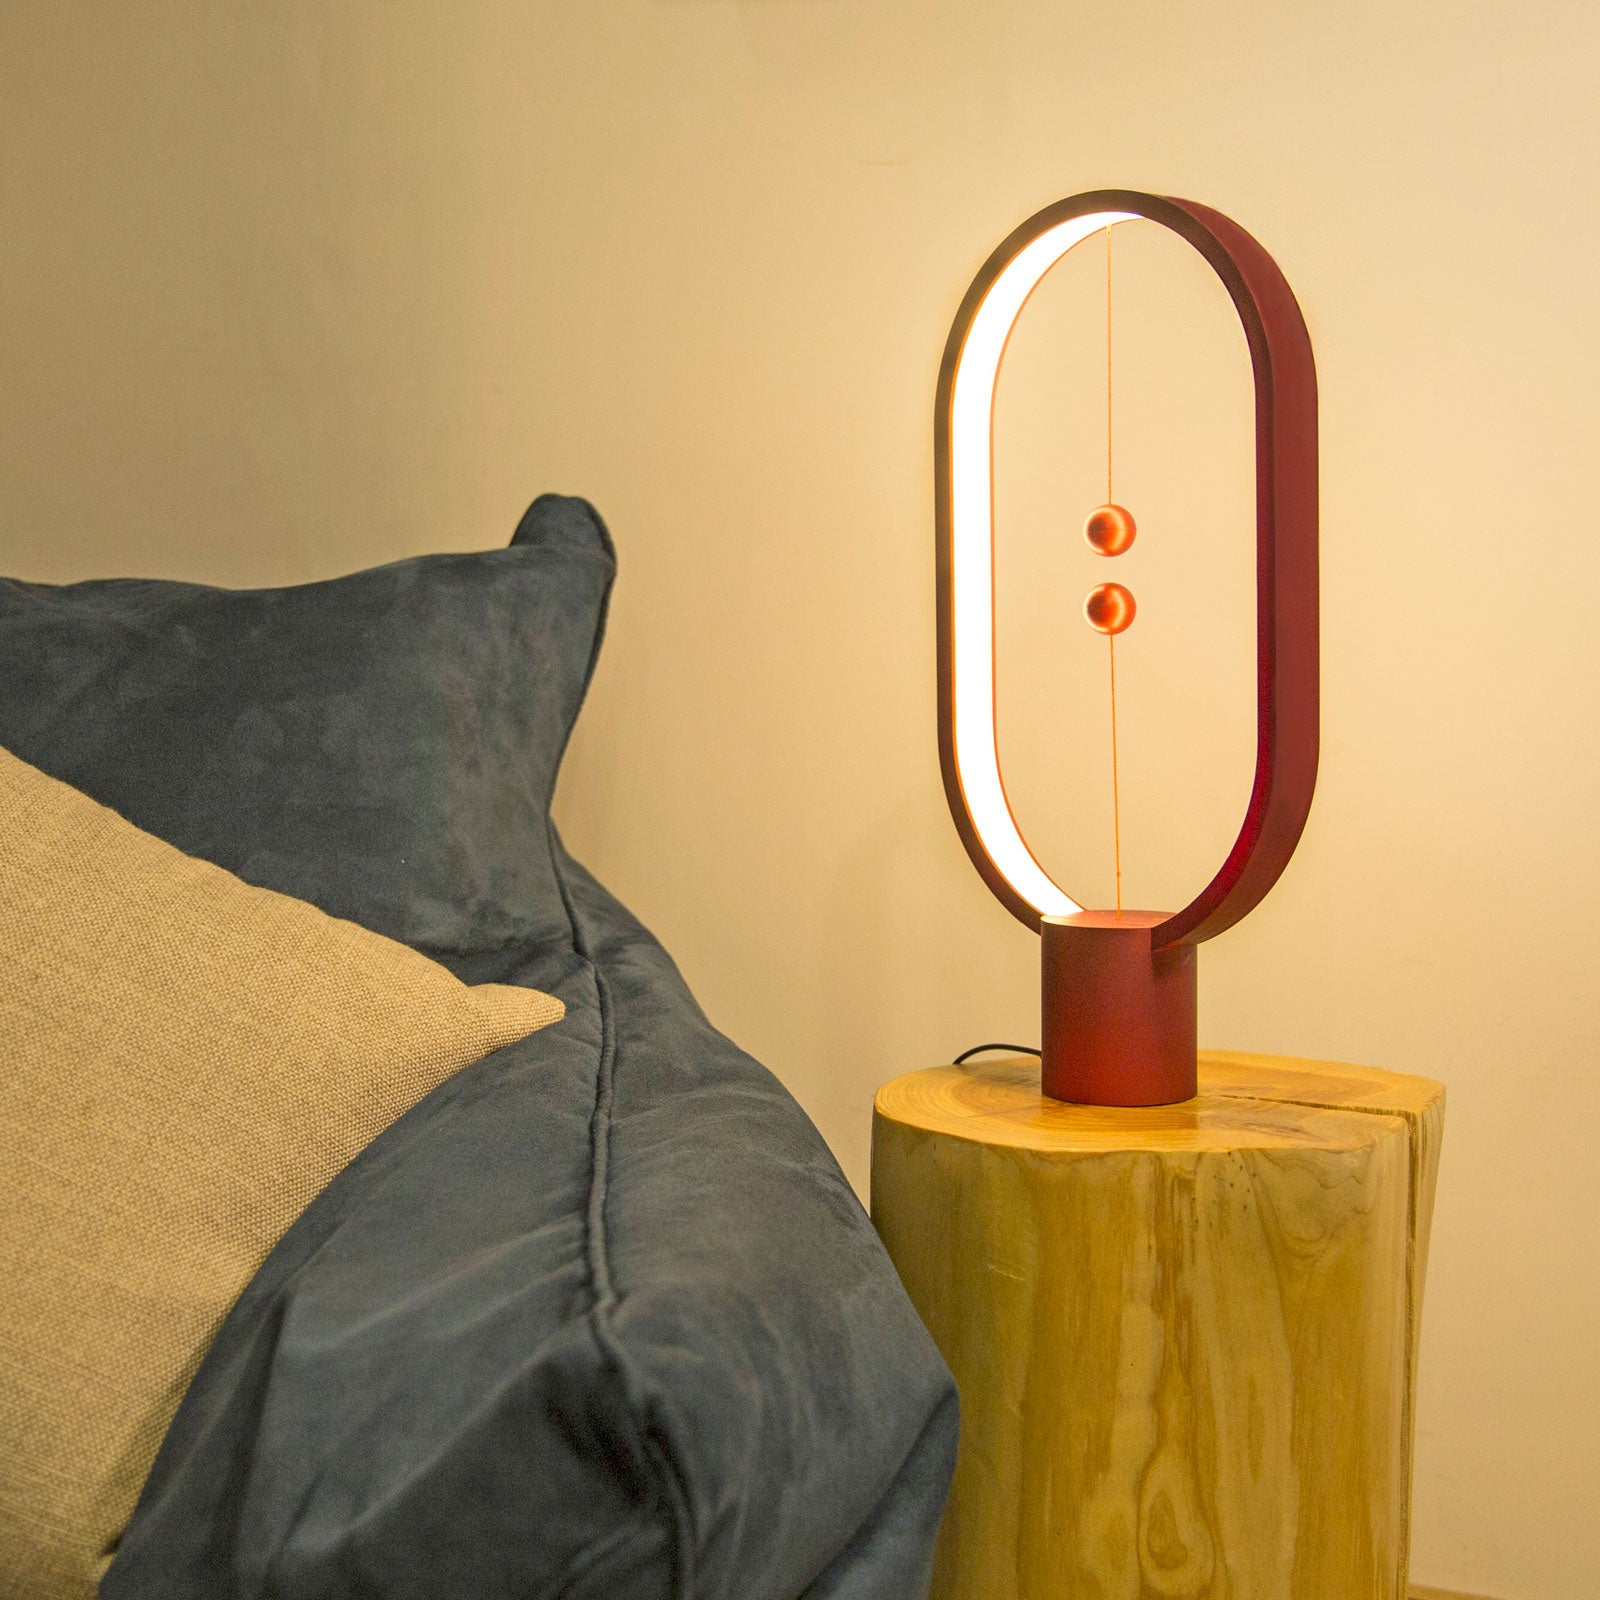 The Magnetic Lamp